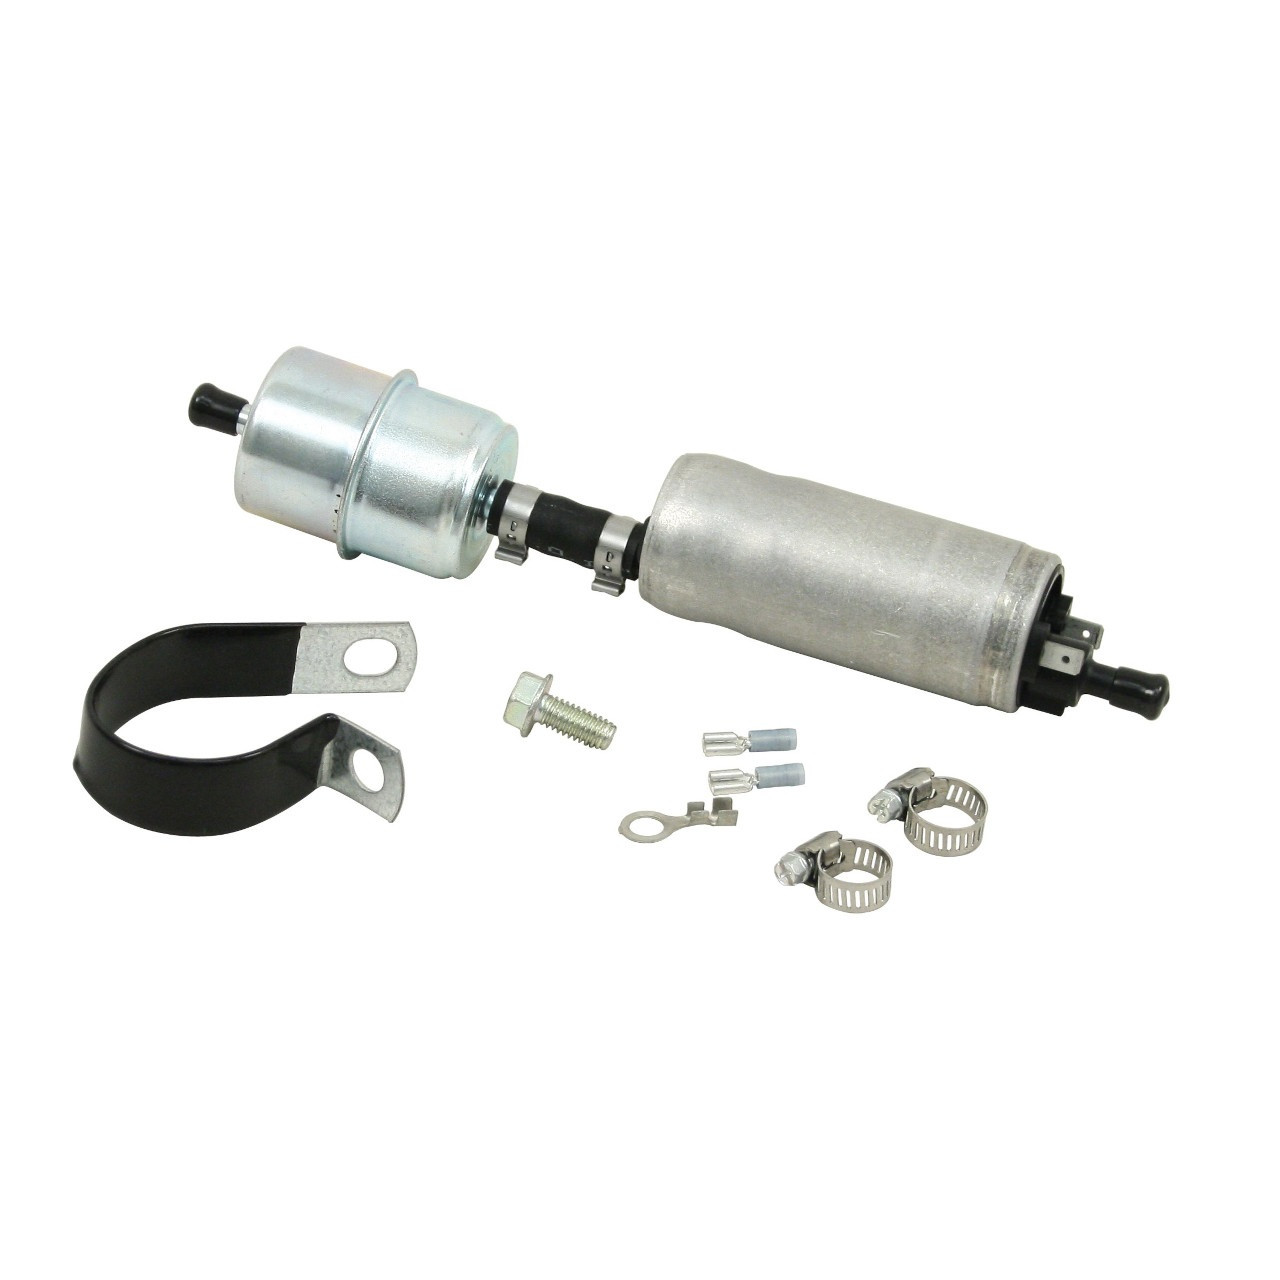 C26-127-205 - 41-2604 - CARTER 12V ELECTRIC FUEL PUMP KIT - WITH FILTER AND  BUILT-IN REGULATOR - 3.5 P.S.I. - WITH 5/16 INCH INLET/OUTER - SUITABLE FOR  ALL CARBURETED CARS - SOLD KIT